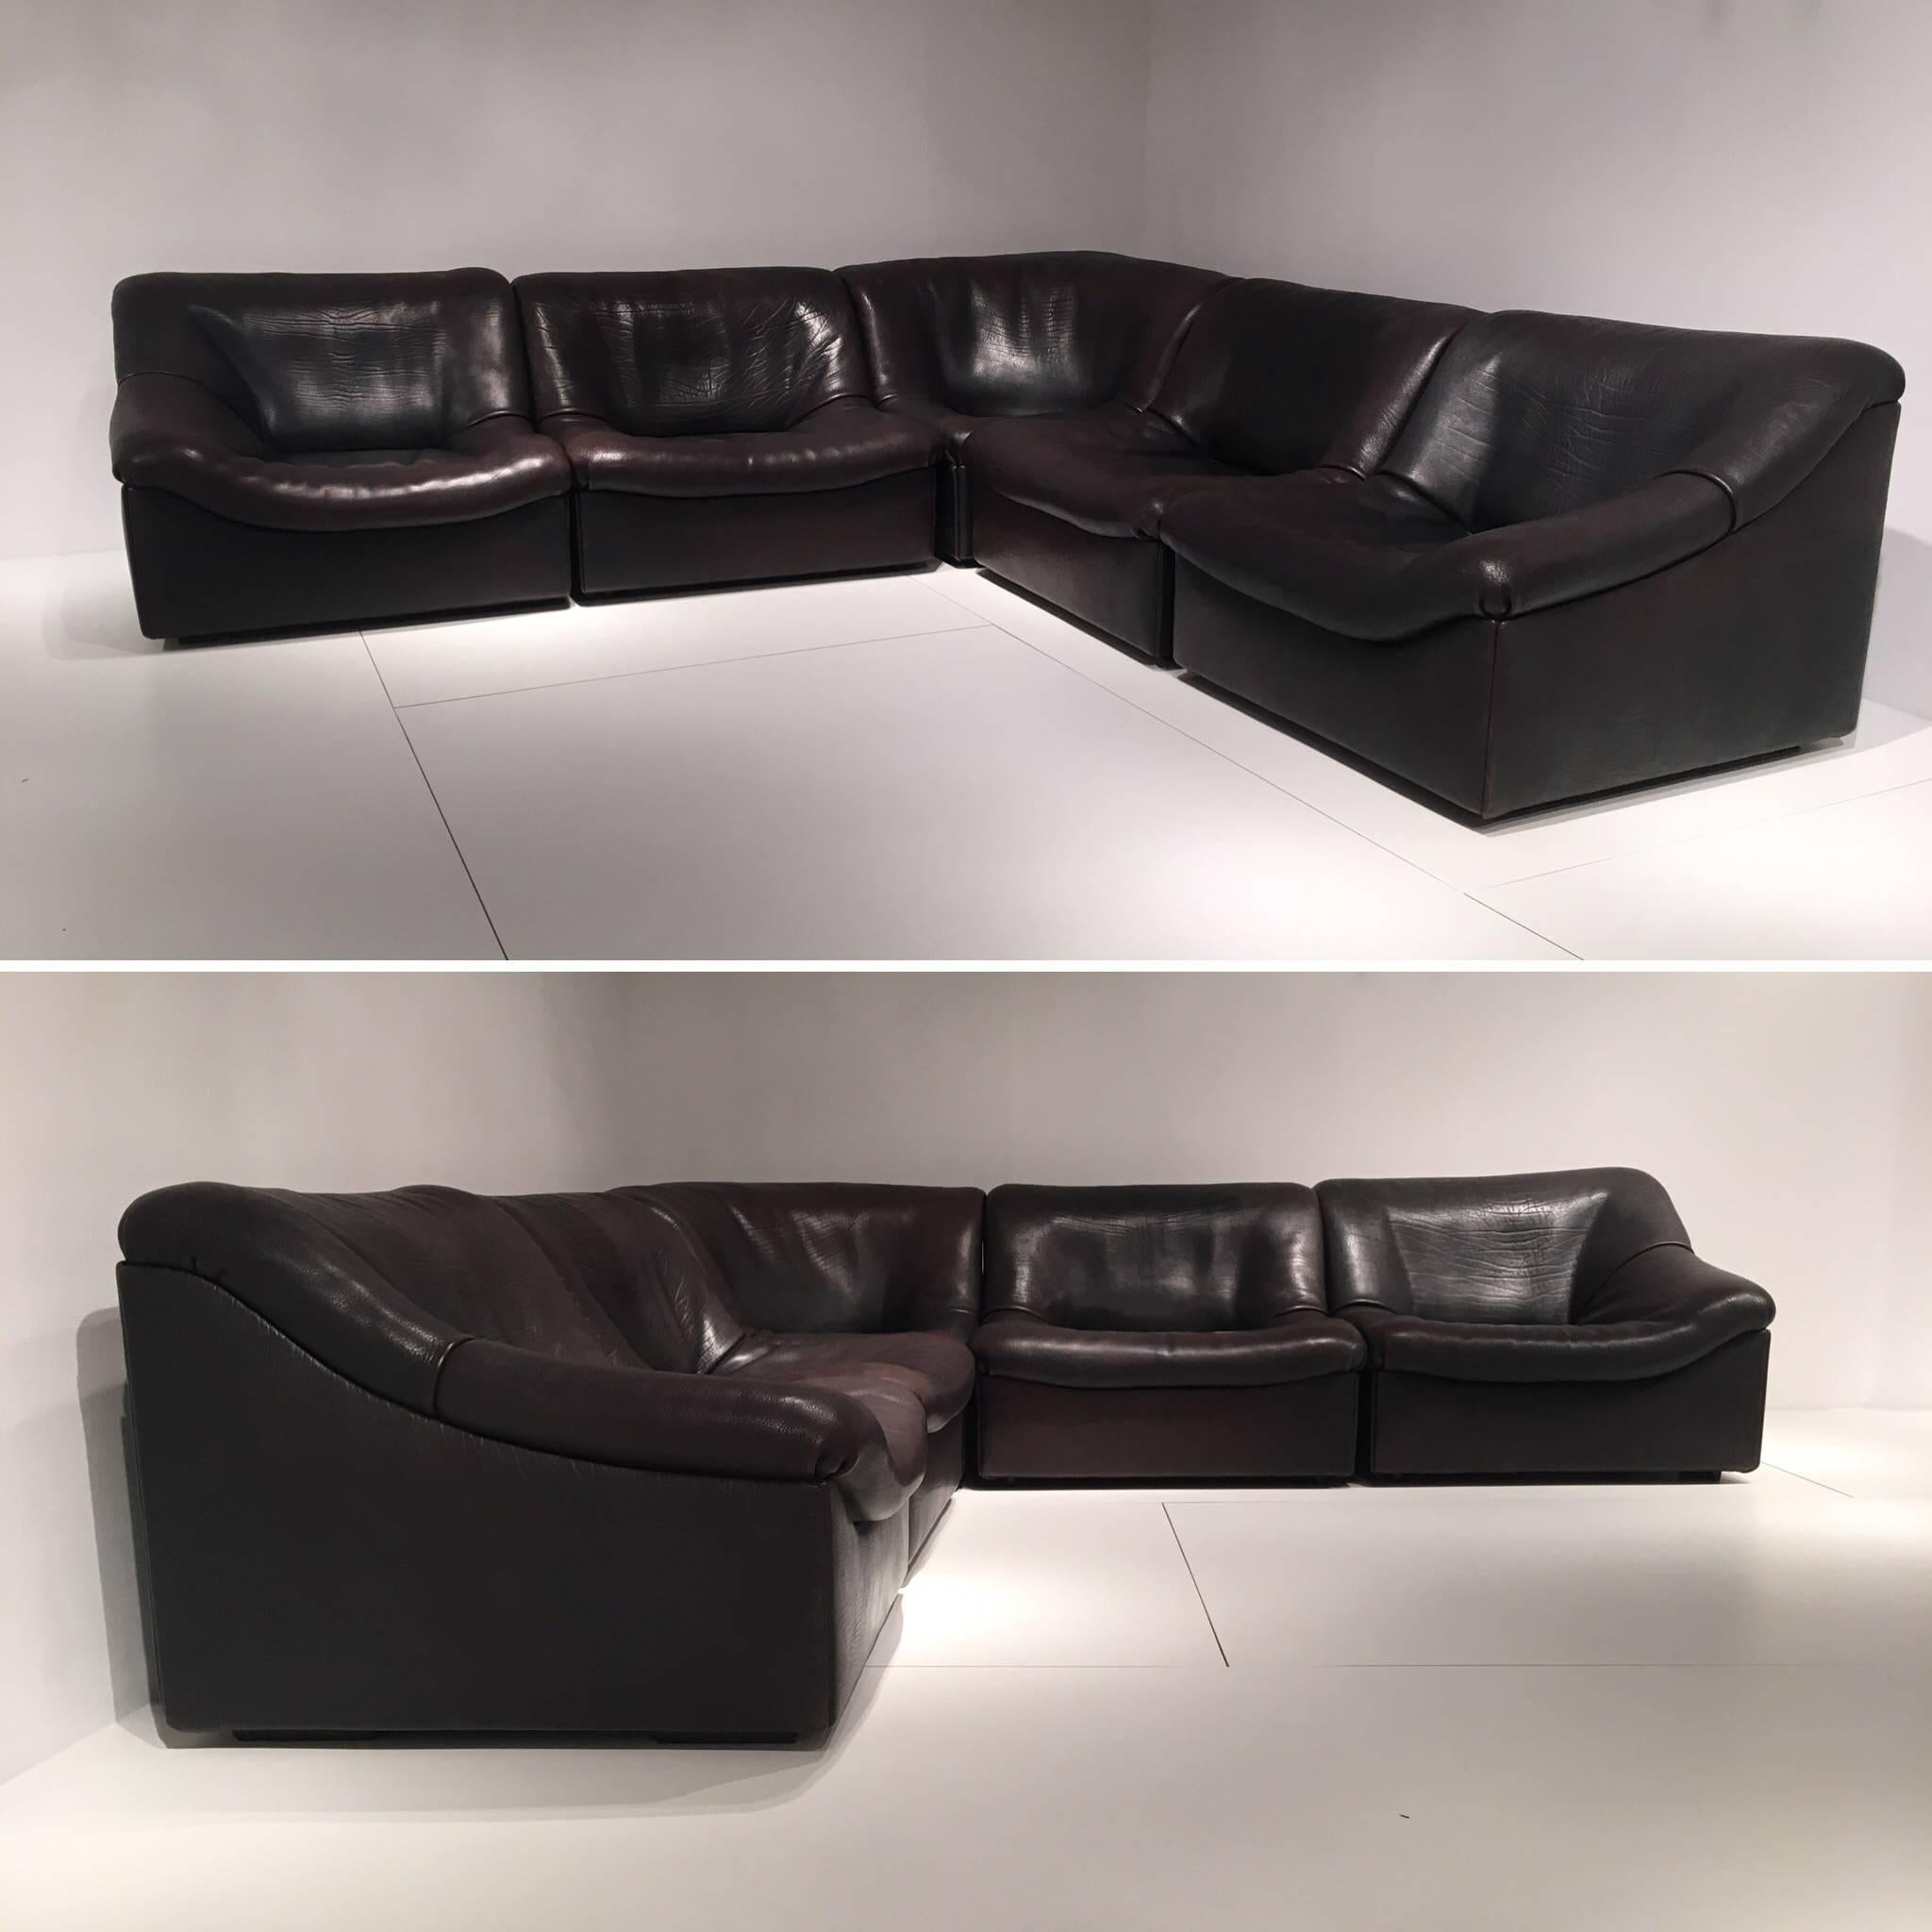 Vintage De Sede DS46 modular sofa, five elements in perfect conditions, circa 1990, no damages no scratch, dark brown buffalo leather.
Size of this De Sede DS46 modular sofa:
267 x 88 x 70 cm / 184 x 88 x 70 cm, seat height 36 cm.